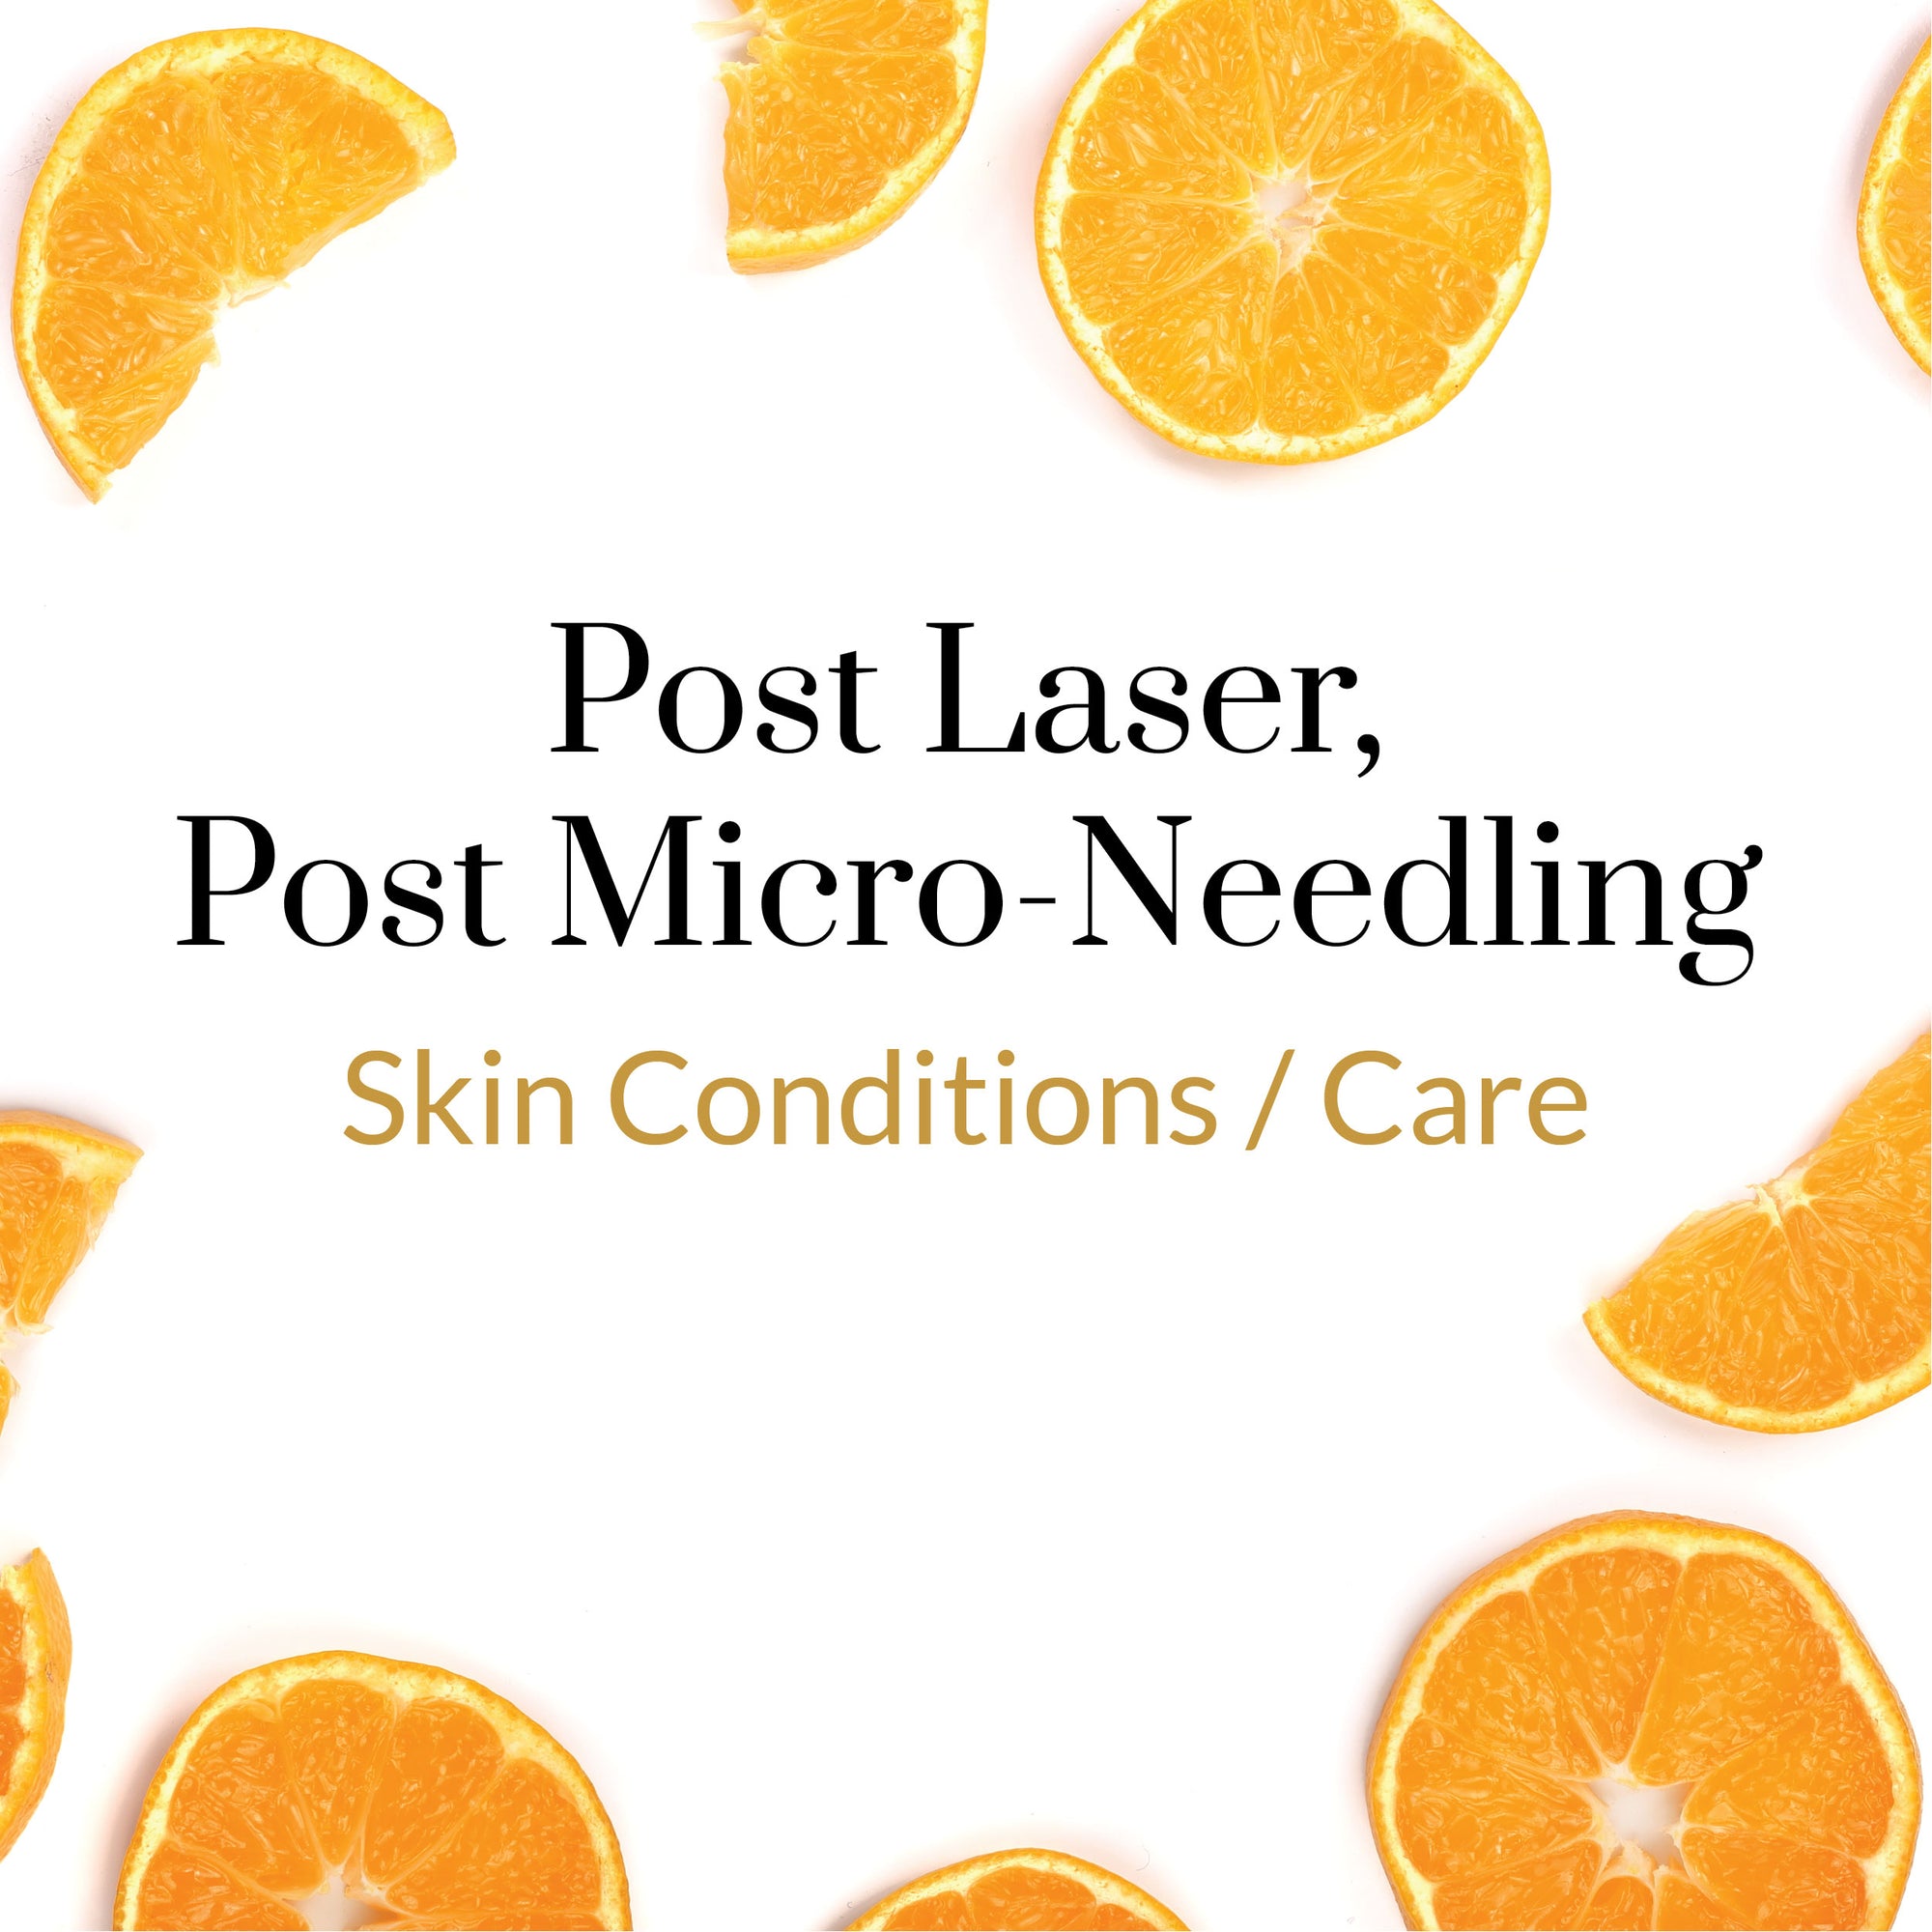 Skin Conditions/Care - Post Laser, Post Micro-Needling